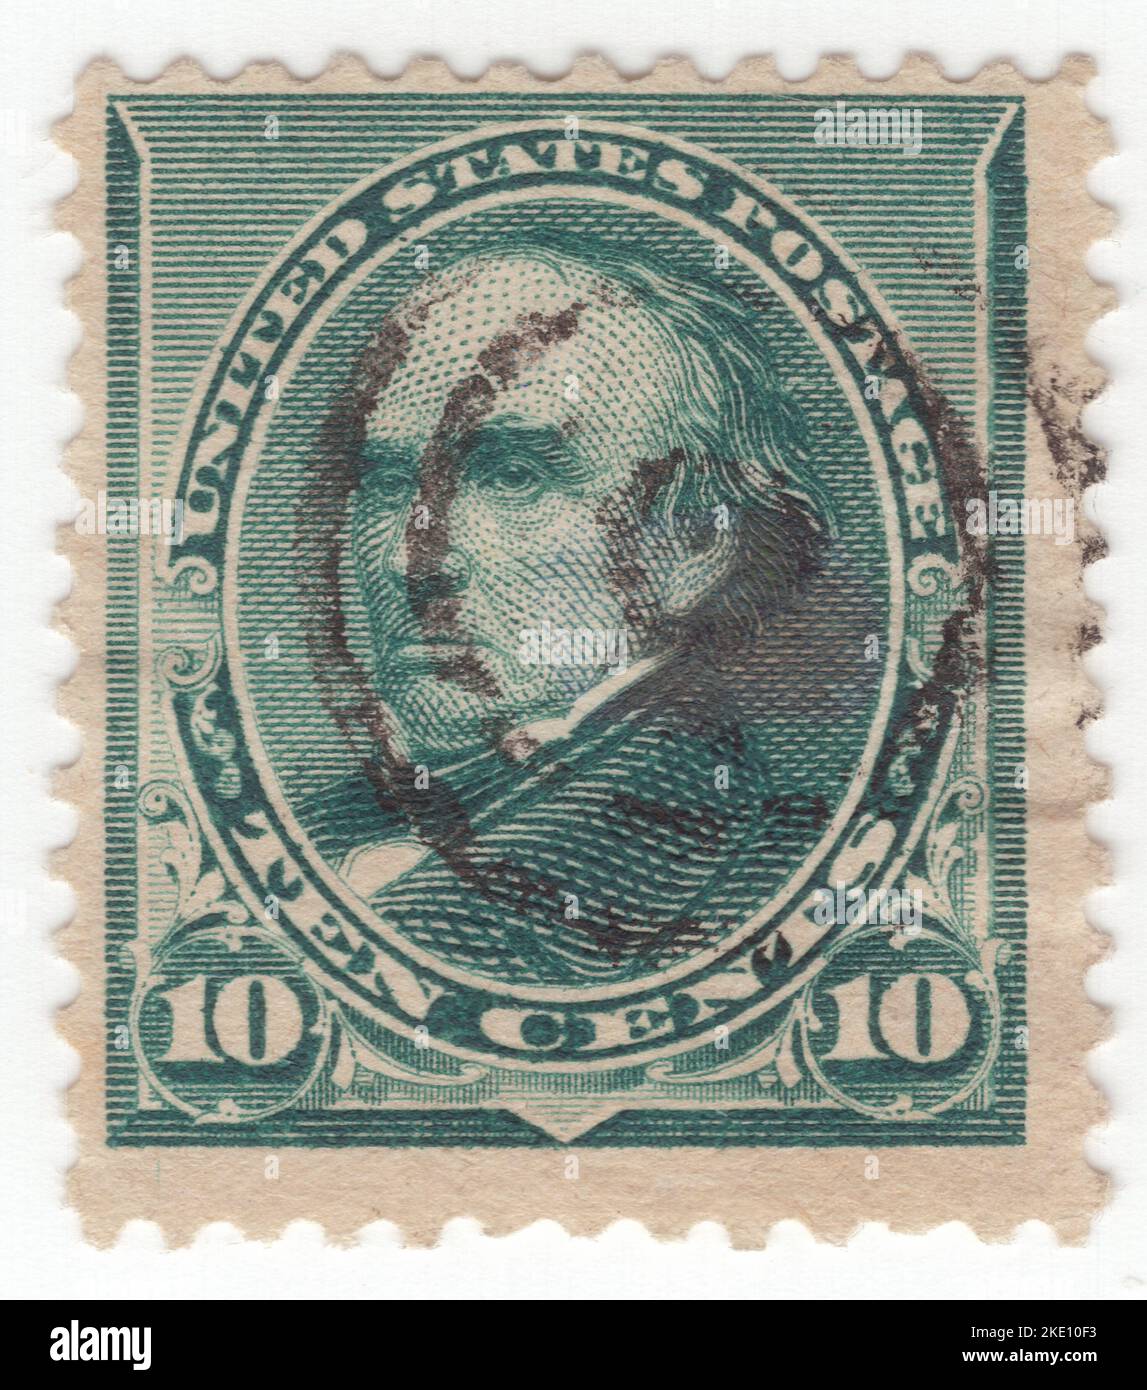 USA - 1890: An 10 cents green postage stamp depicting portrait of Daniel Webster, American lawyer and statesman who represented New Hampshire and Massachusetts in the U.S. Congress and served as the U.S. Secretary of State under Presidents William Henry Harrison, John Tyler, and Millard Fillmore. Webster was one of the most prominent American lawyers of the 19th century, and argued over 200 cases before the U.S. Supreme Court between 1814 and his death in 1852. During his life, he was a member of the Federalist Party, the National Republican Party, and the Whig Party Stock Photo